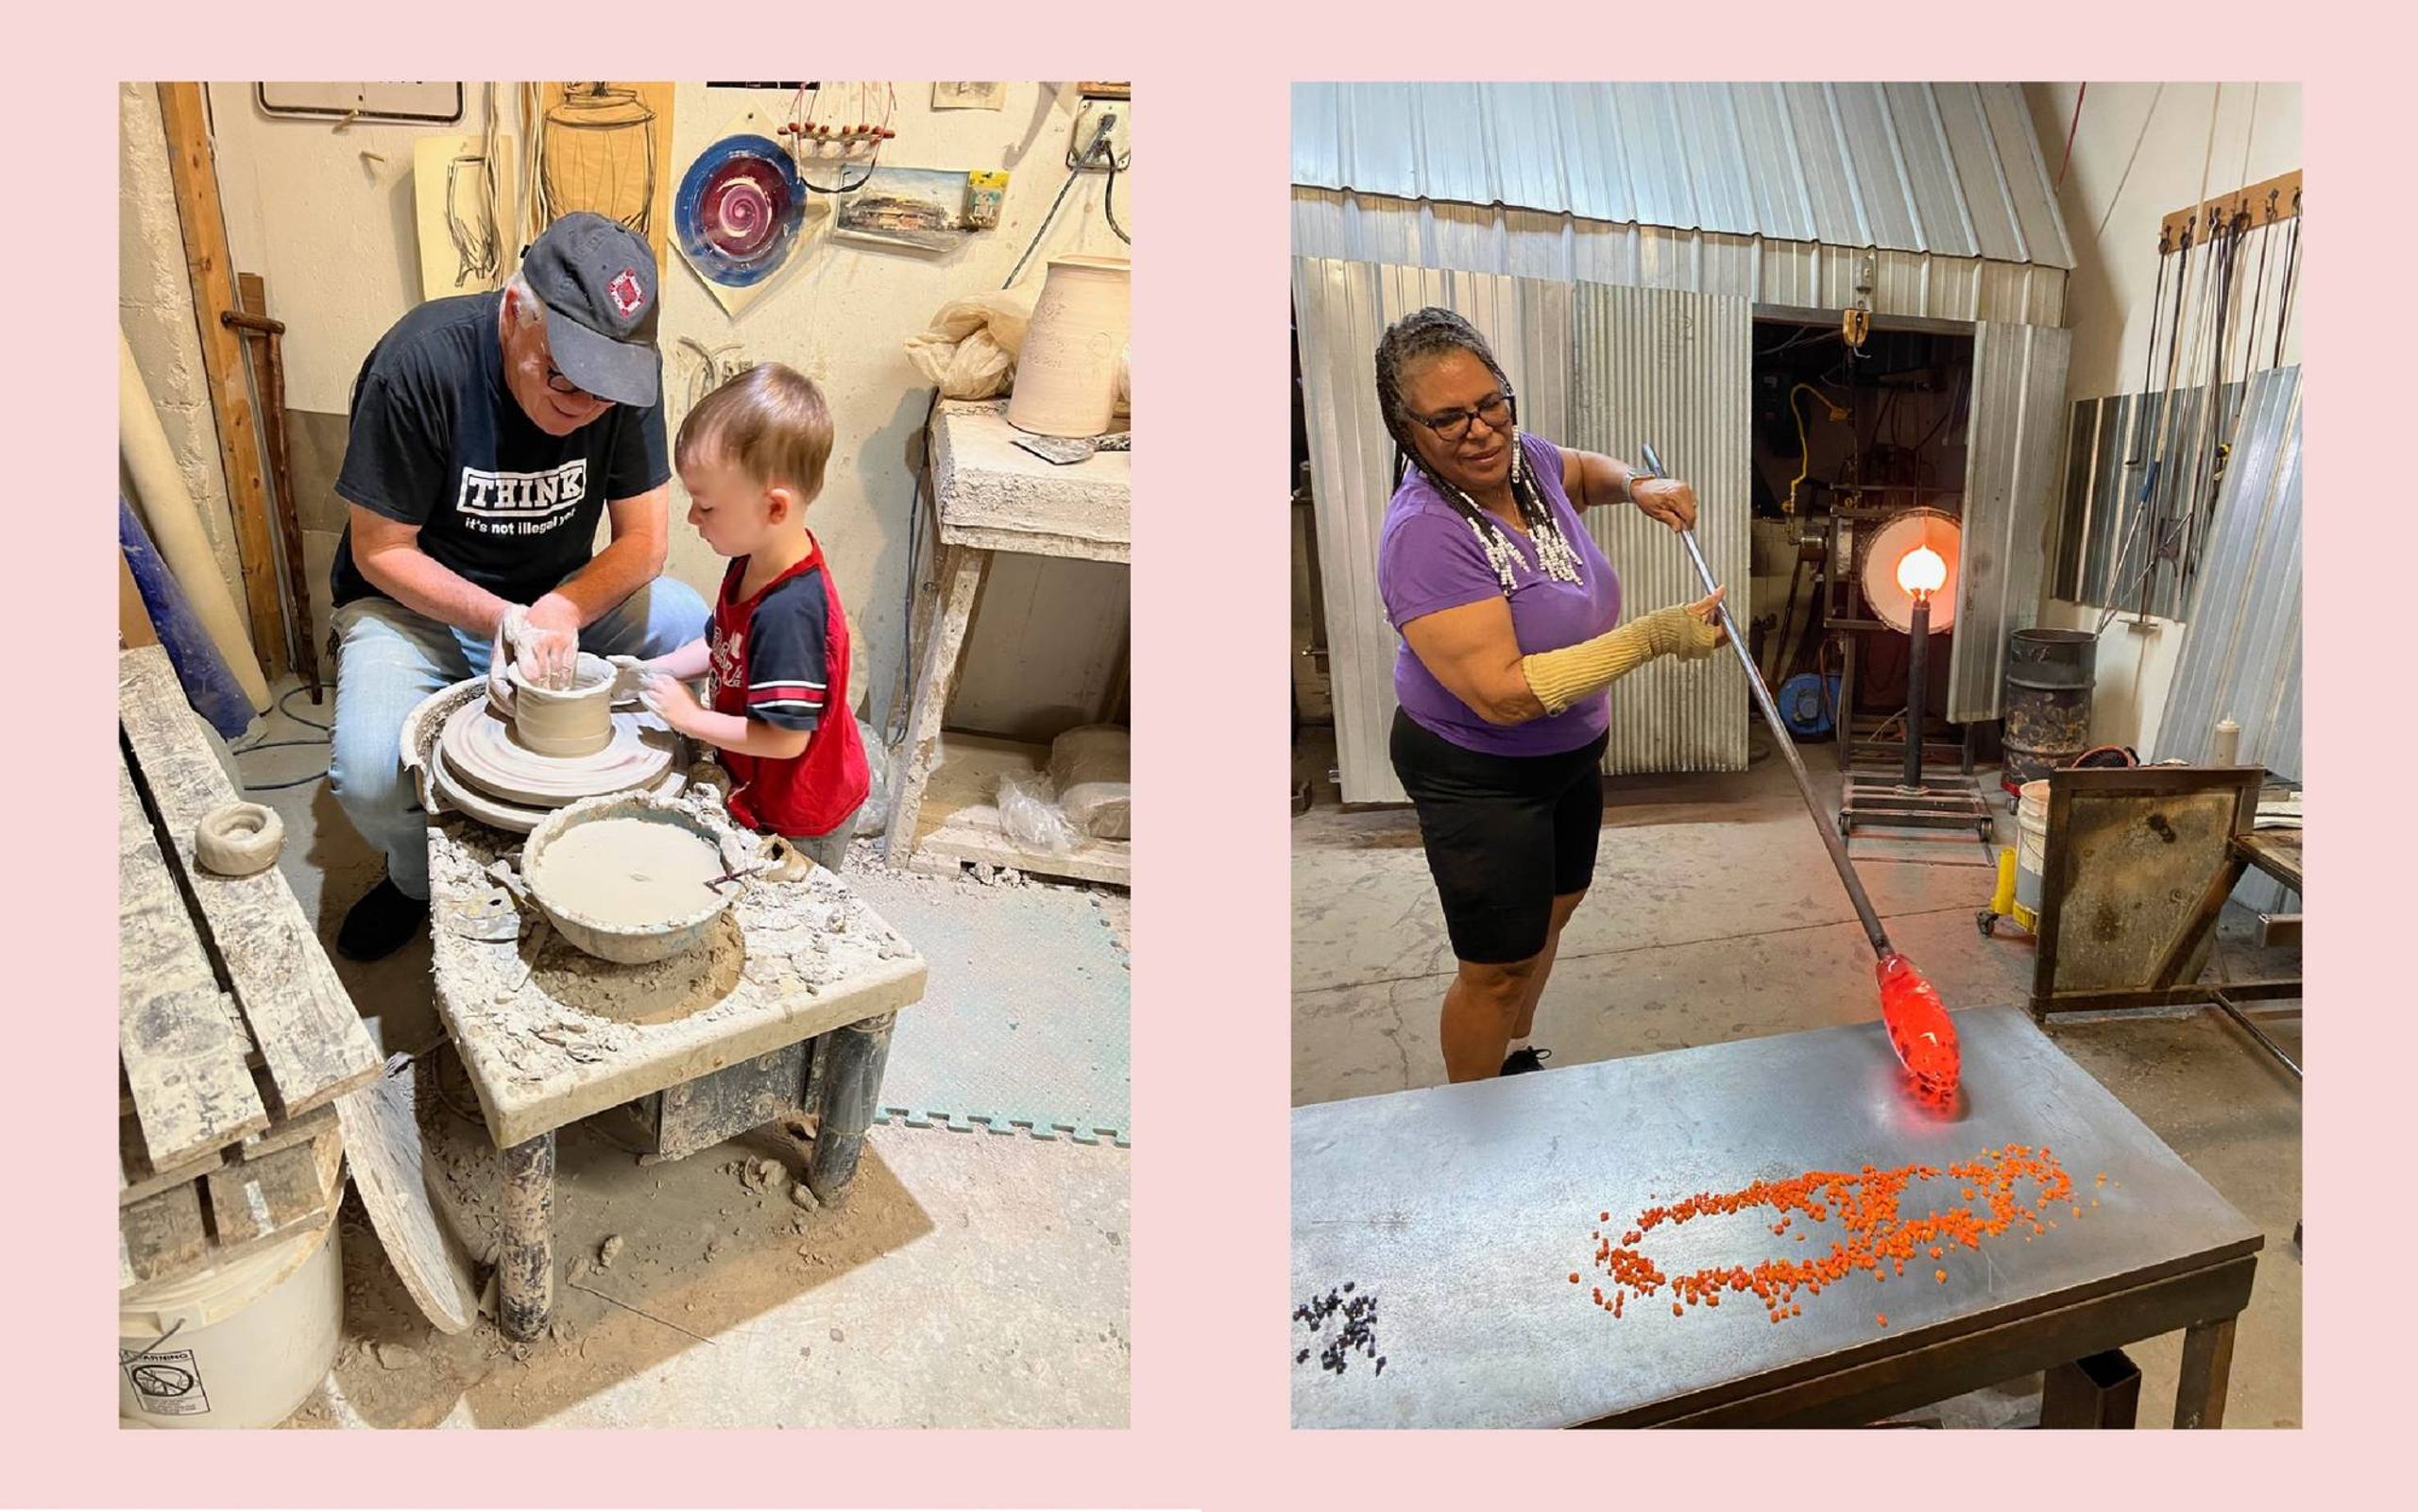 A photo collage of a man doing pottery with a toddler and a woman working on a glass blowing project. Next Avenue